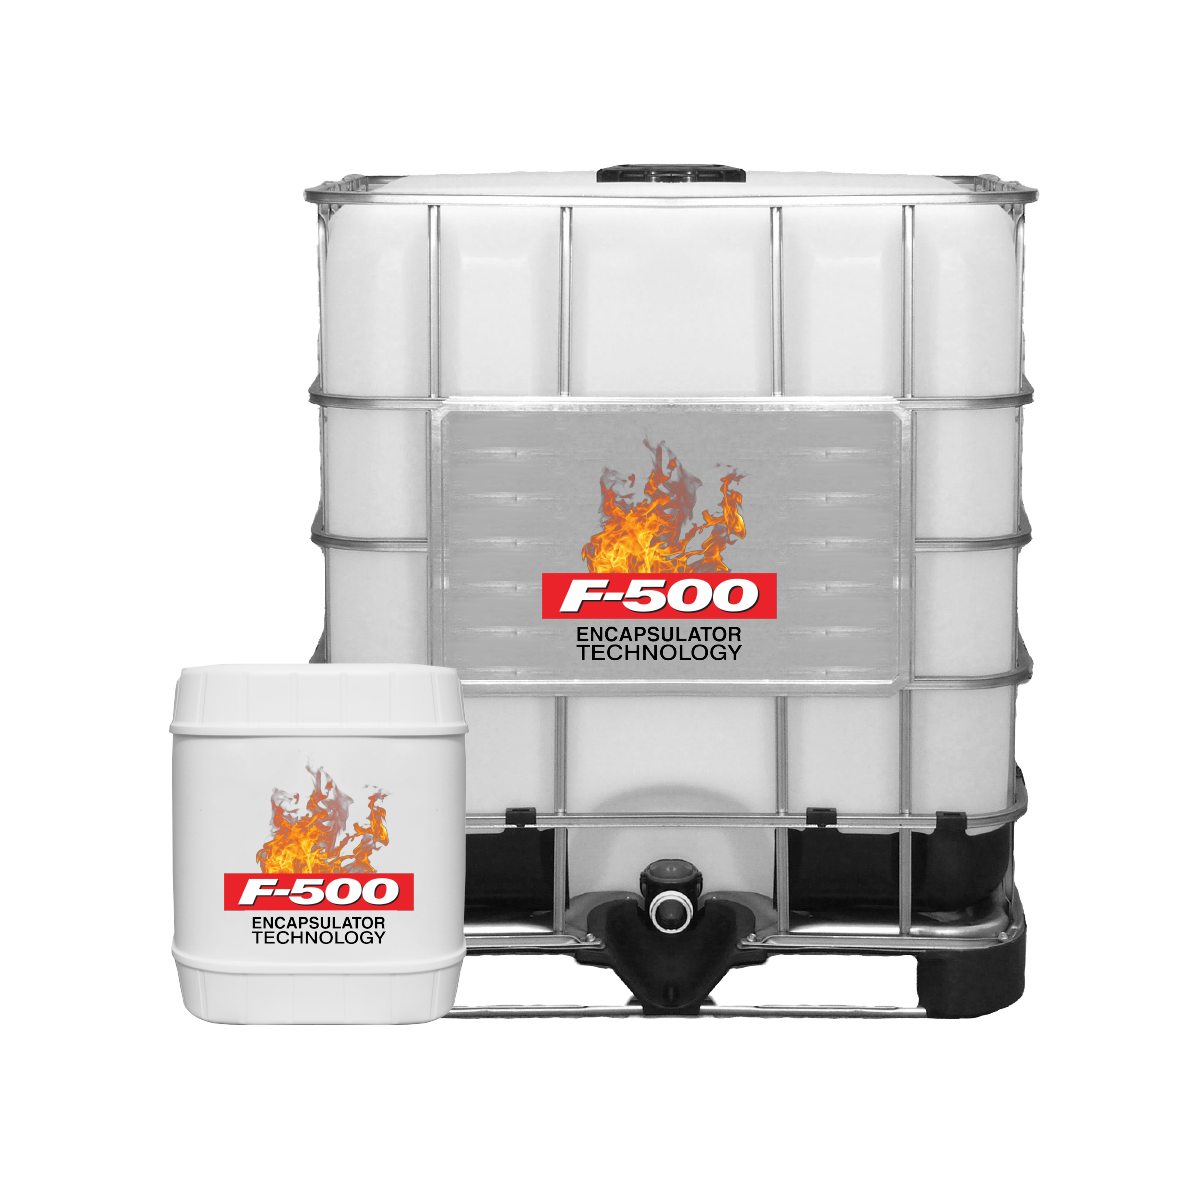 Stockage des produits flash – Ultimate Fire Products